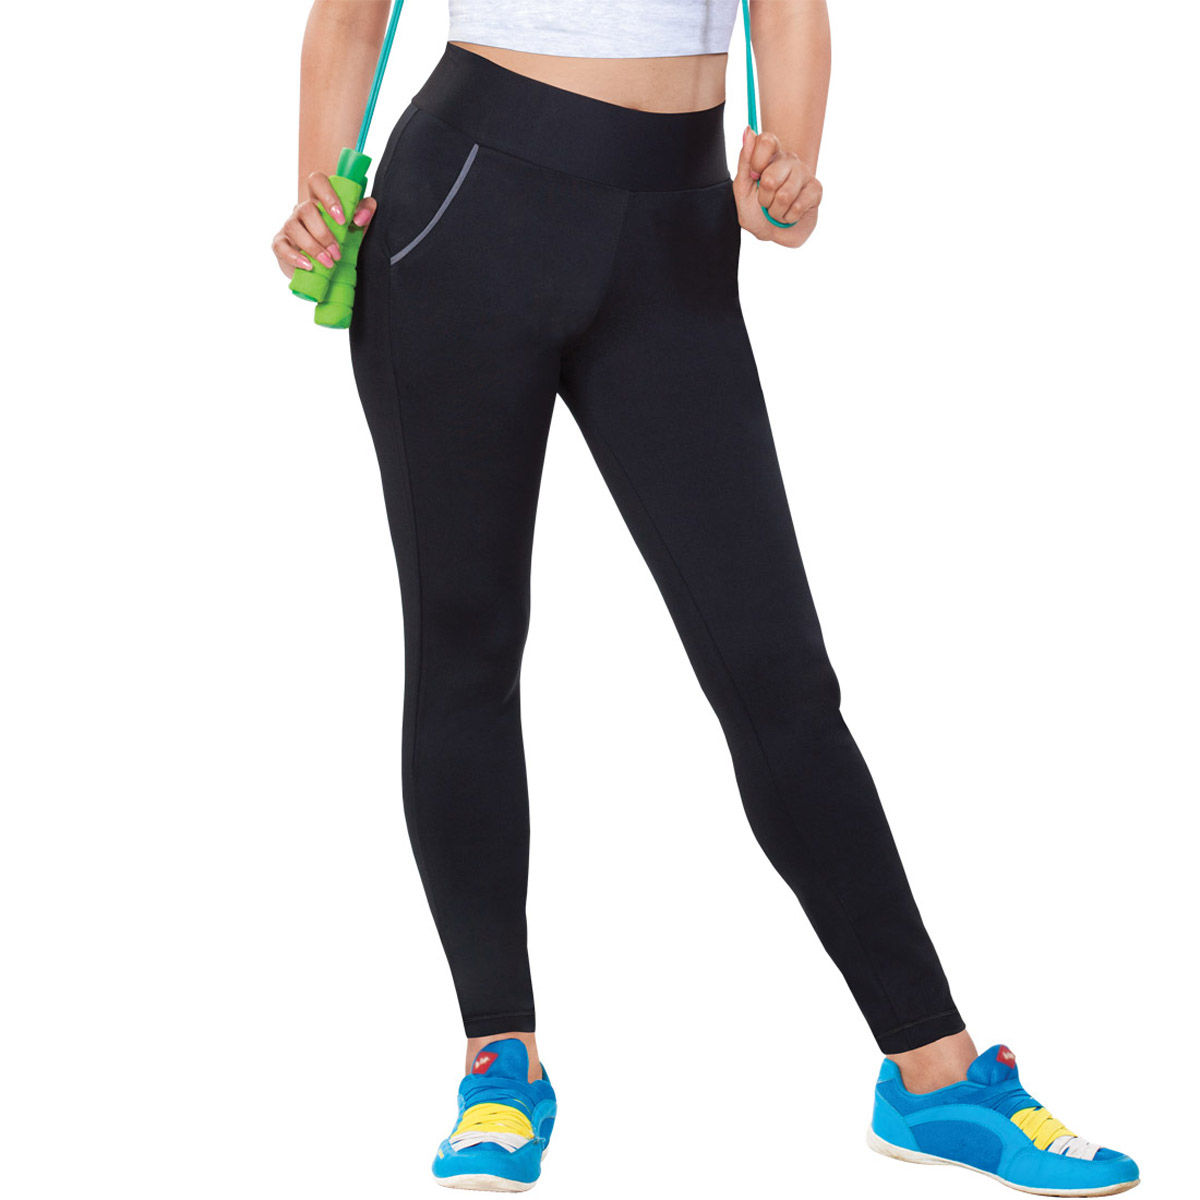 Cukoo Black  Pink ActivewearYogaGymSports Track Pants with Zipped  Pocket Buy Cukoo Black  Pink ActivewearYogaGymSports Track Pants with  Zipped Pocket Online at Best Price in India  Nykaa